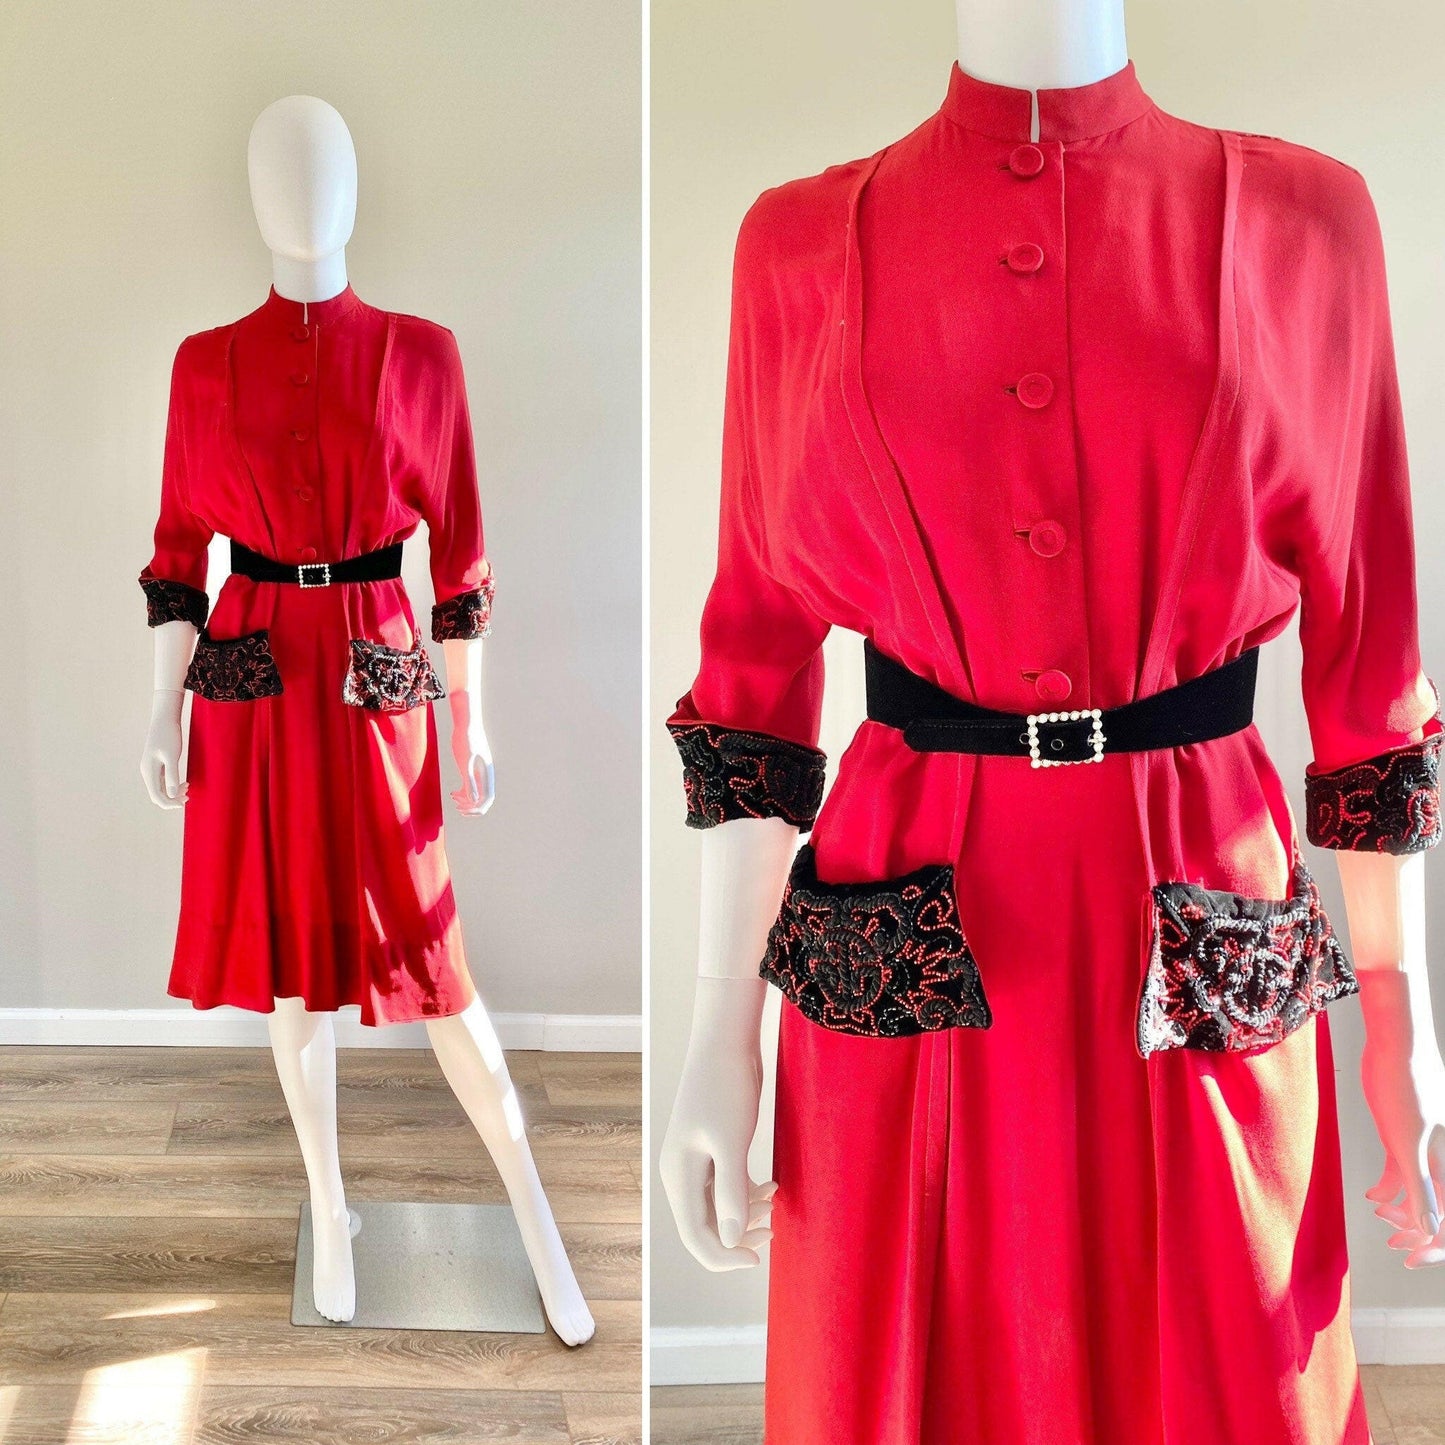 Vintage 1950s Red Rayon Dress / 50s holiday dress Size M